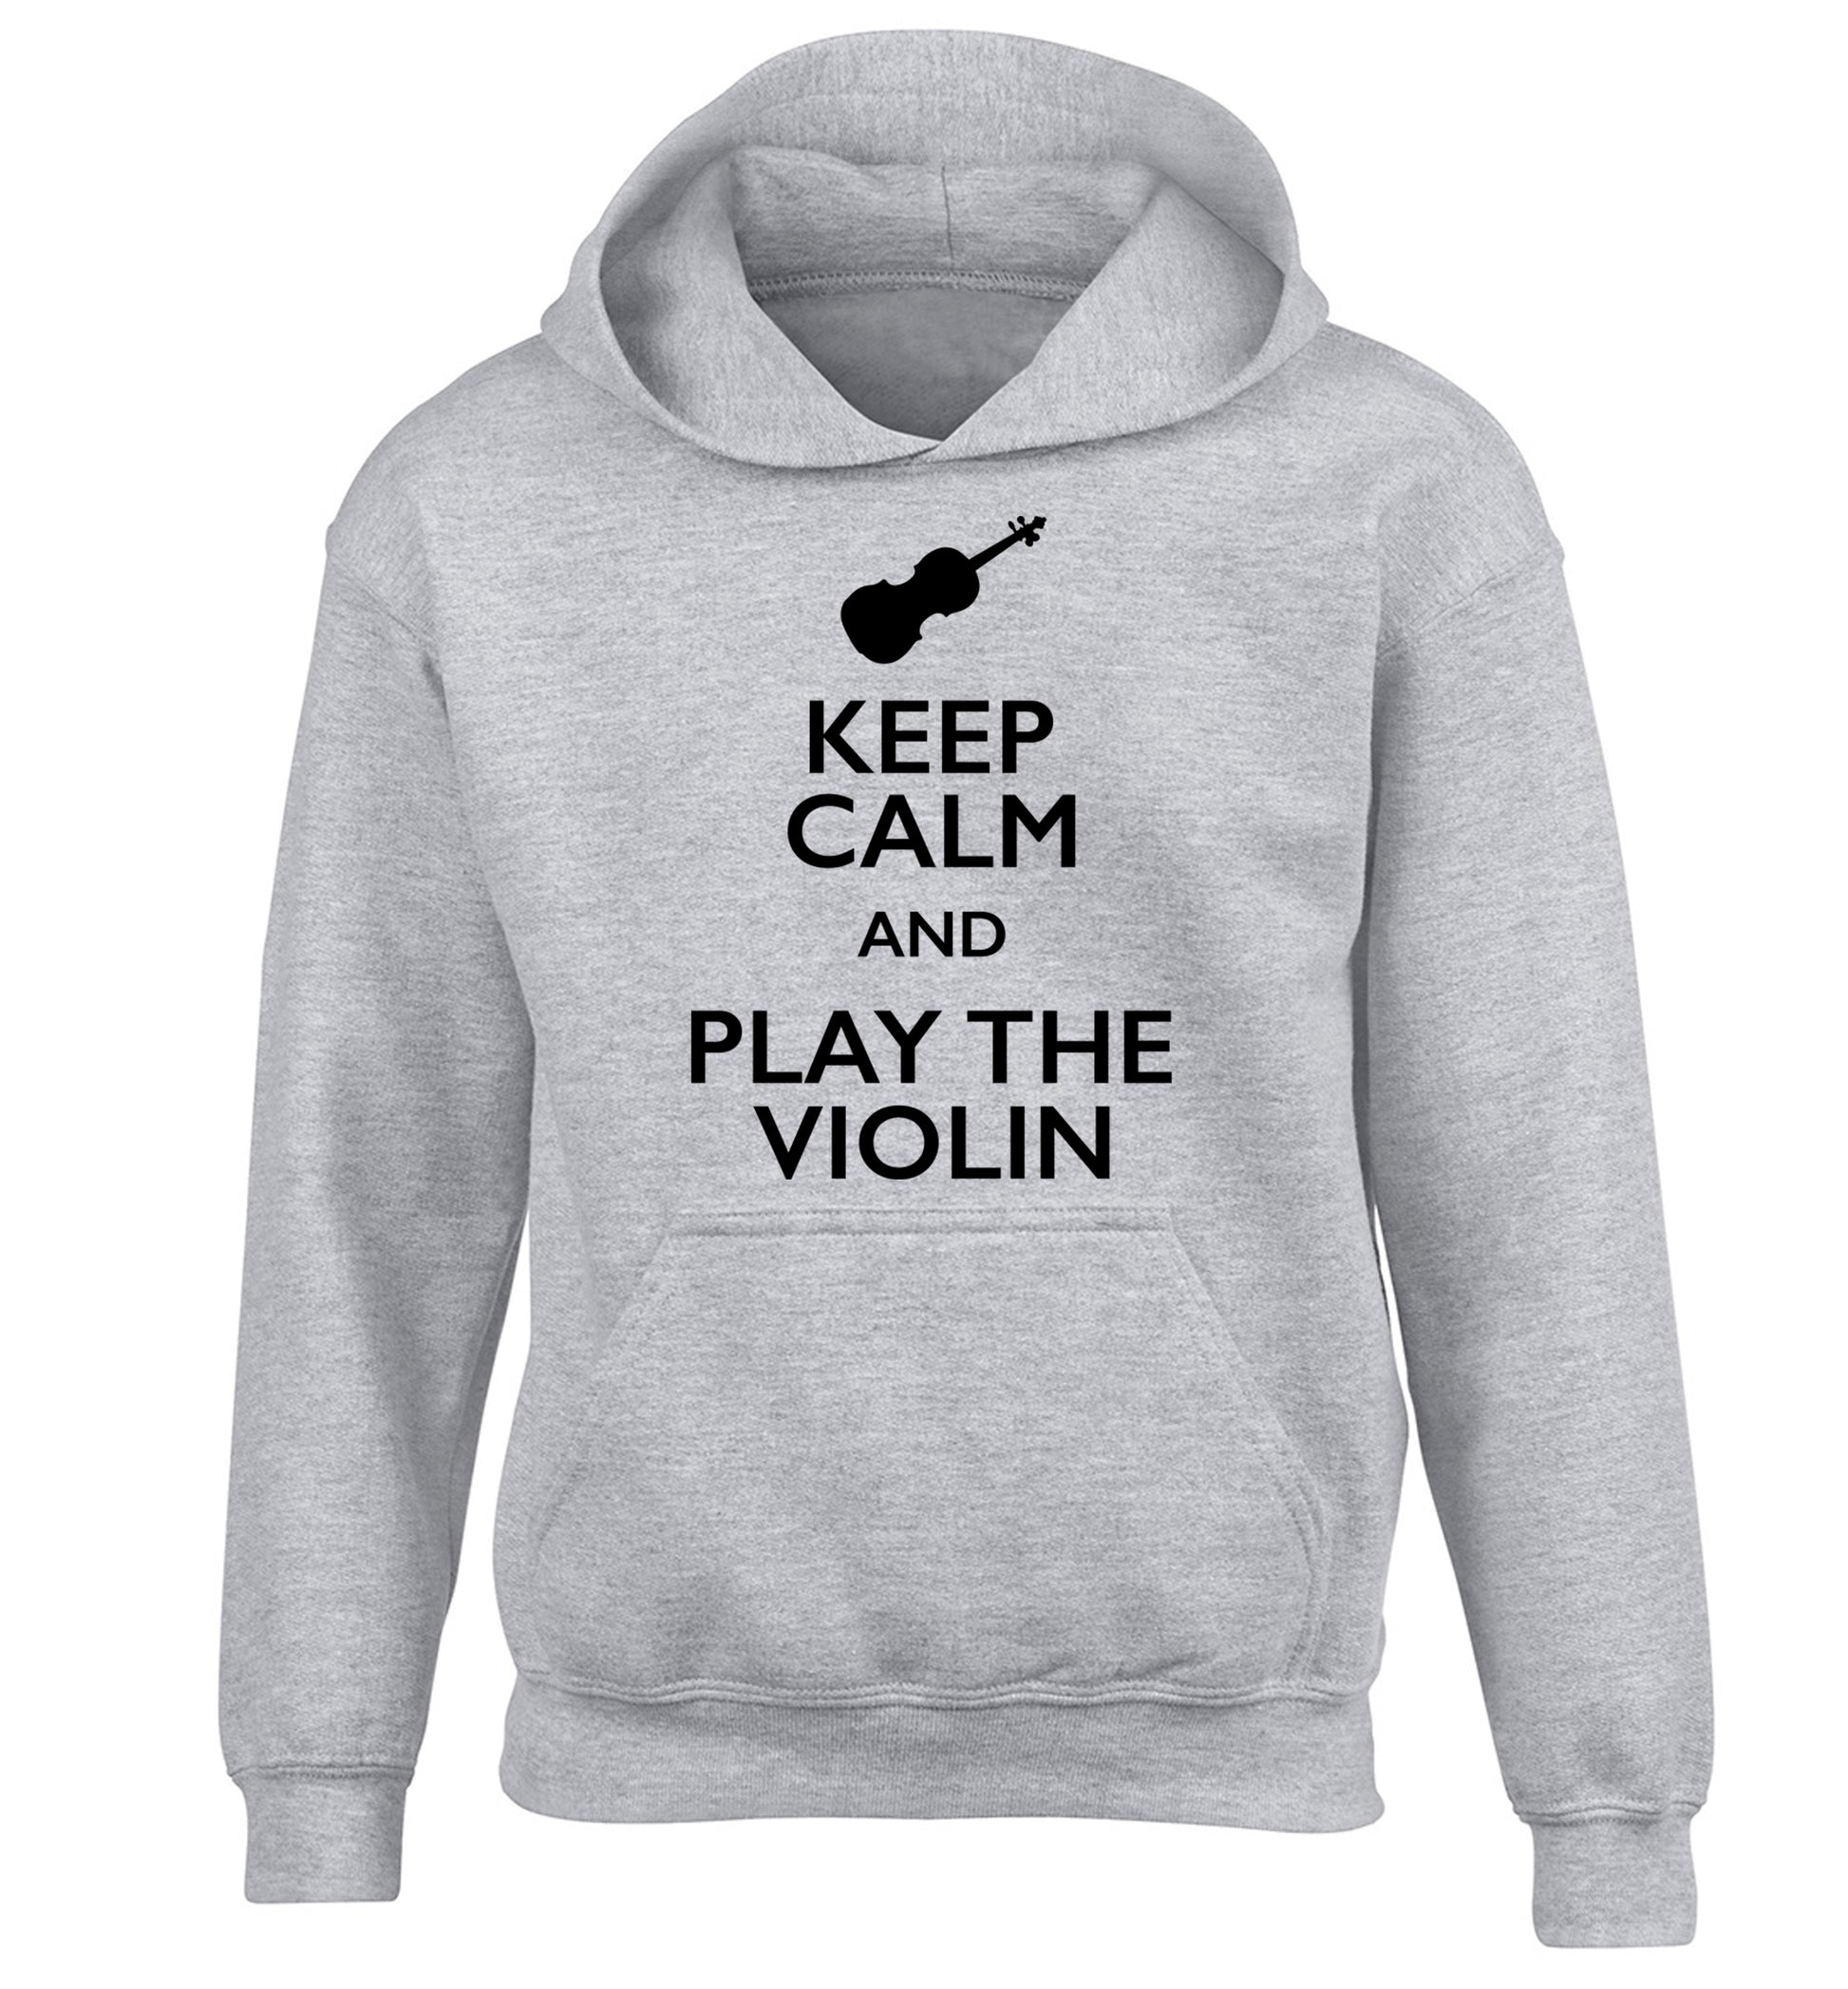 Keep calm and play the violin children's grey hoodie 12-13 Years